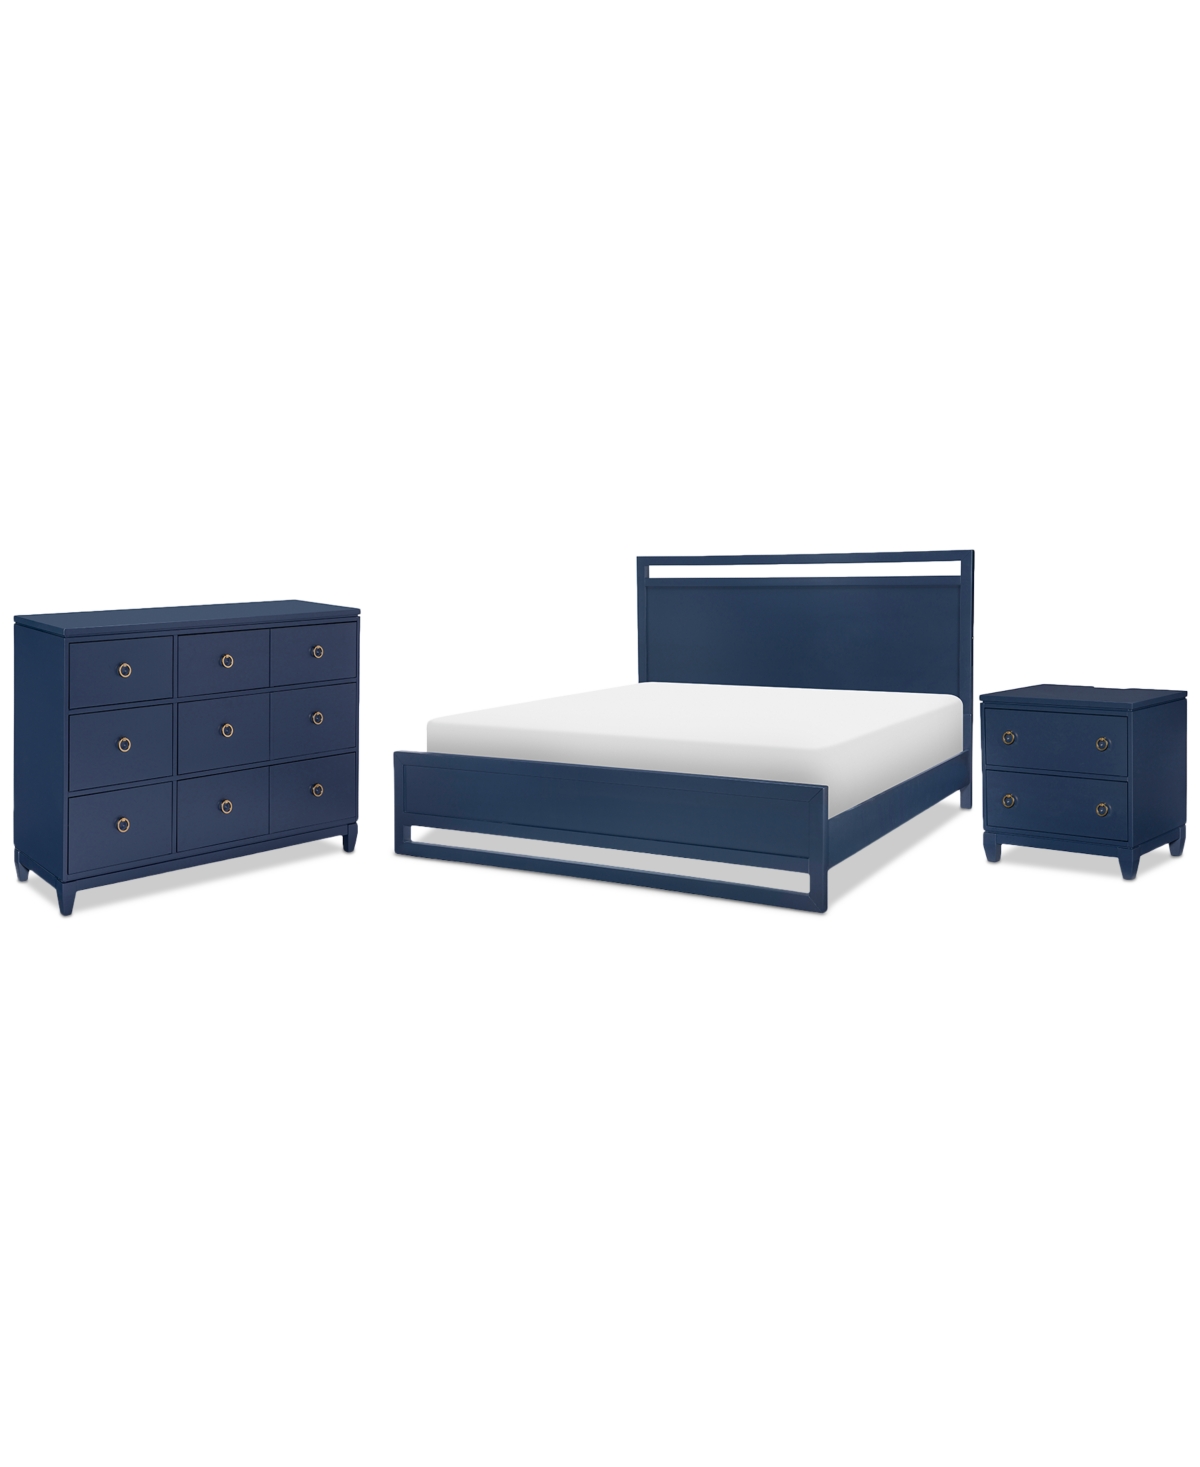 Furniture Summerland 3pc Bedroom Set (california King Panel Bed, Chest, Nightstand) In Blue